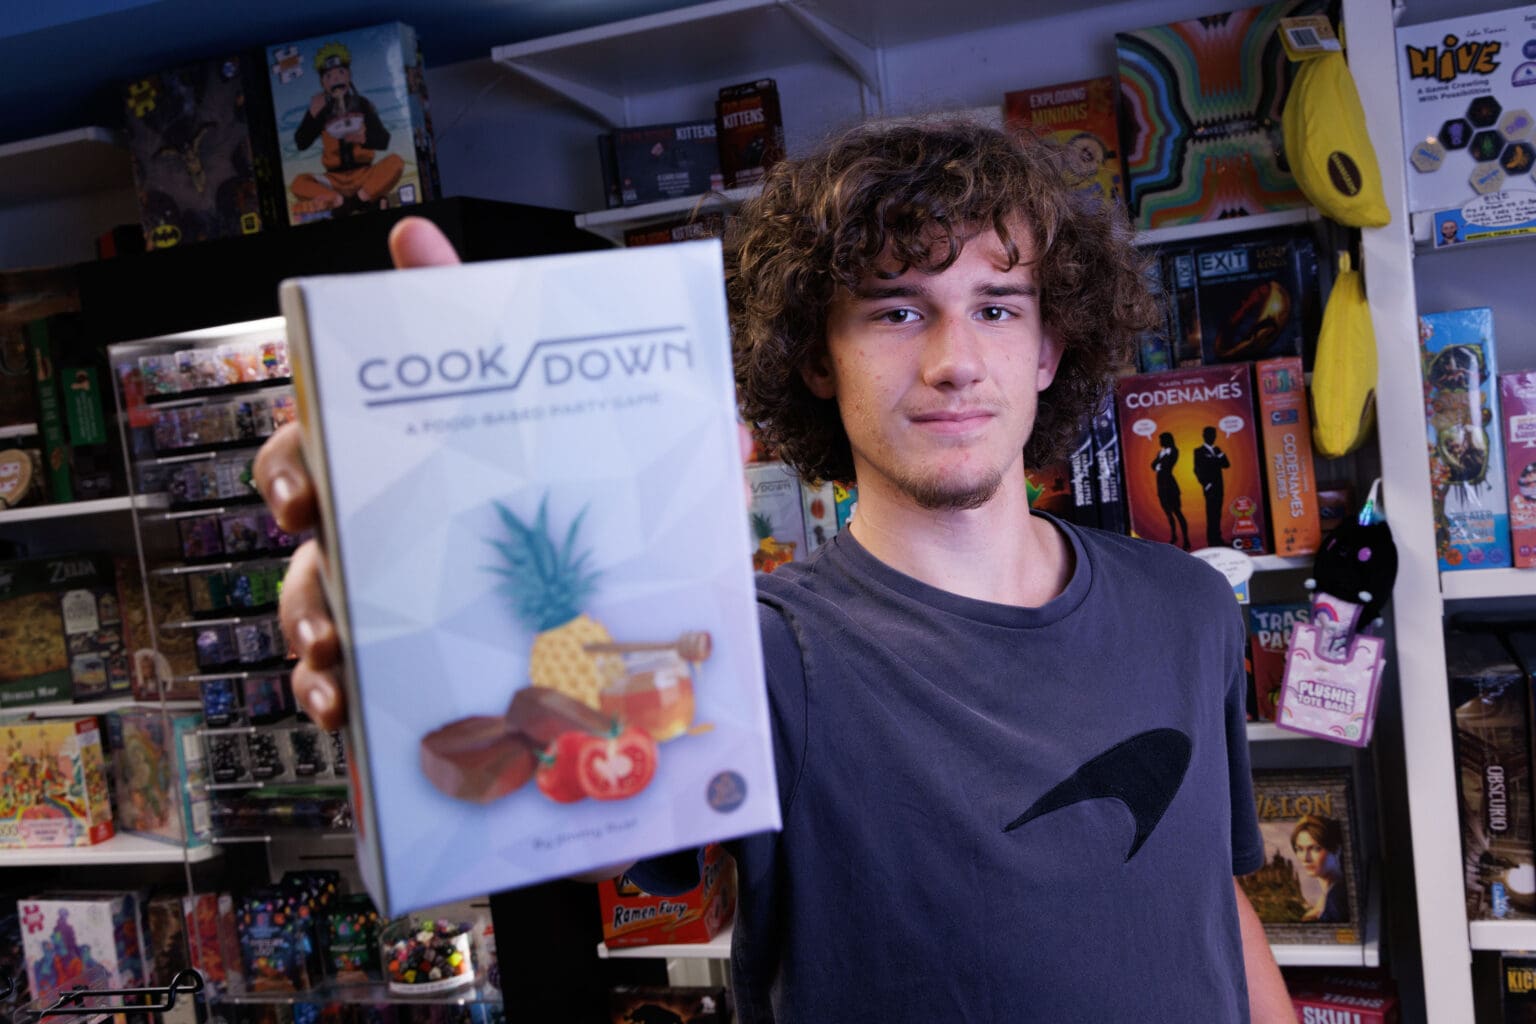 Jimmy Rust holding up his board game called 'Cookdown'.